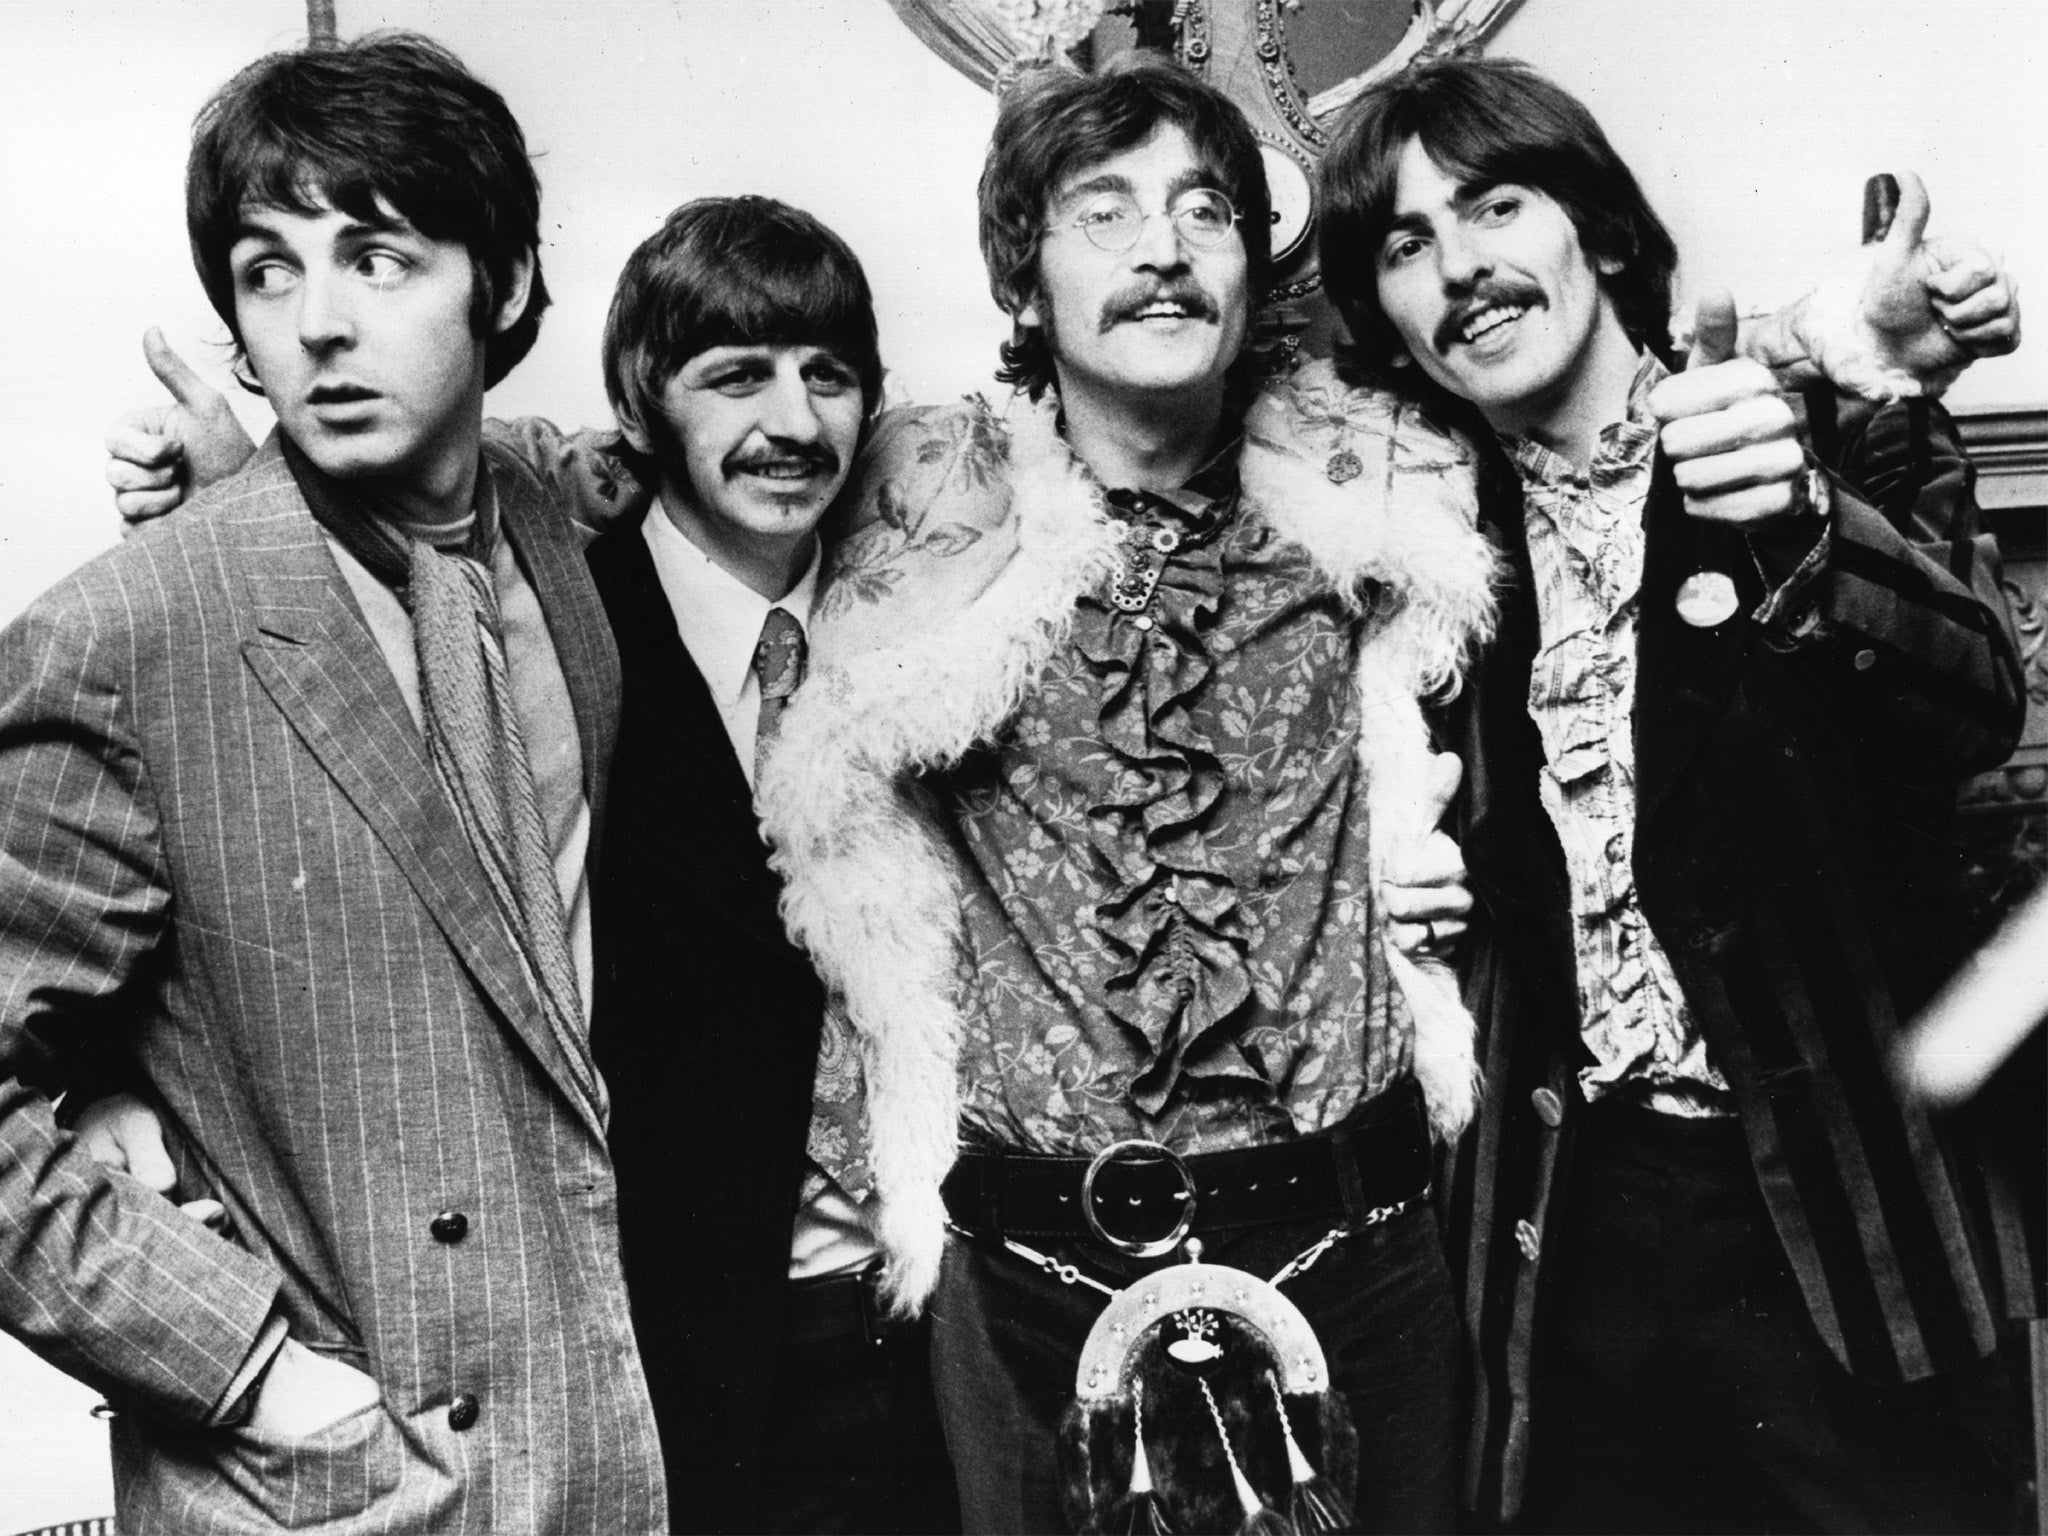 Paul McCartney (L) with The Beatles on 19 May 1967, just after recording ‘Sgt Pepper’